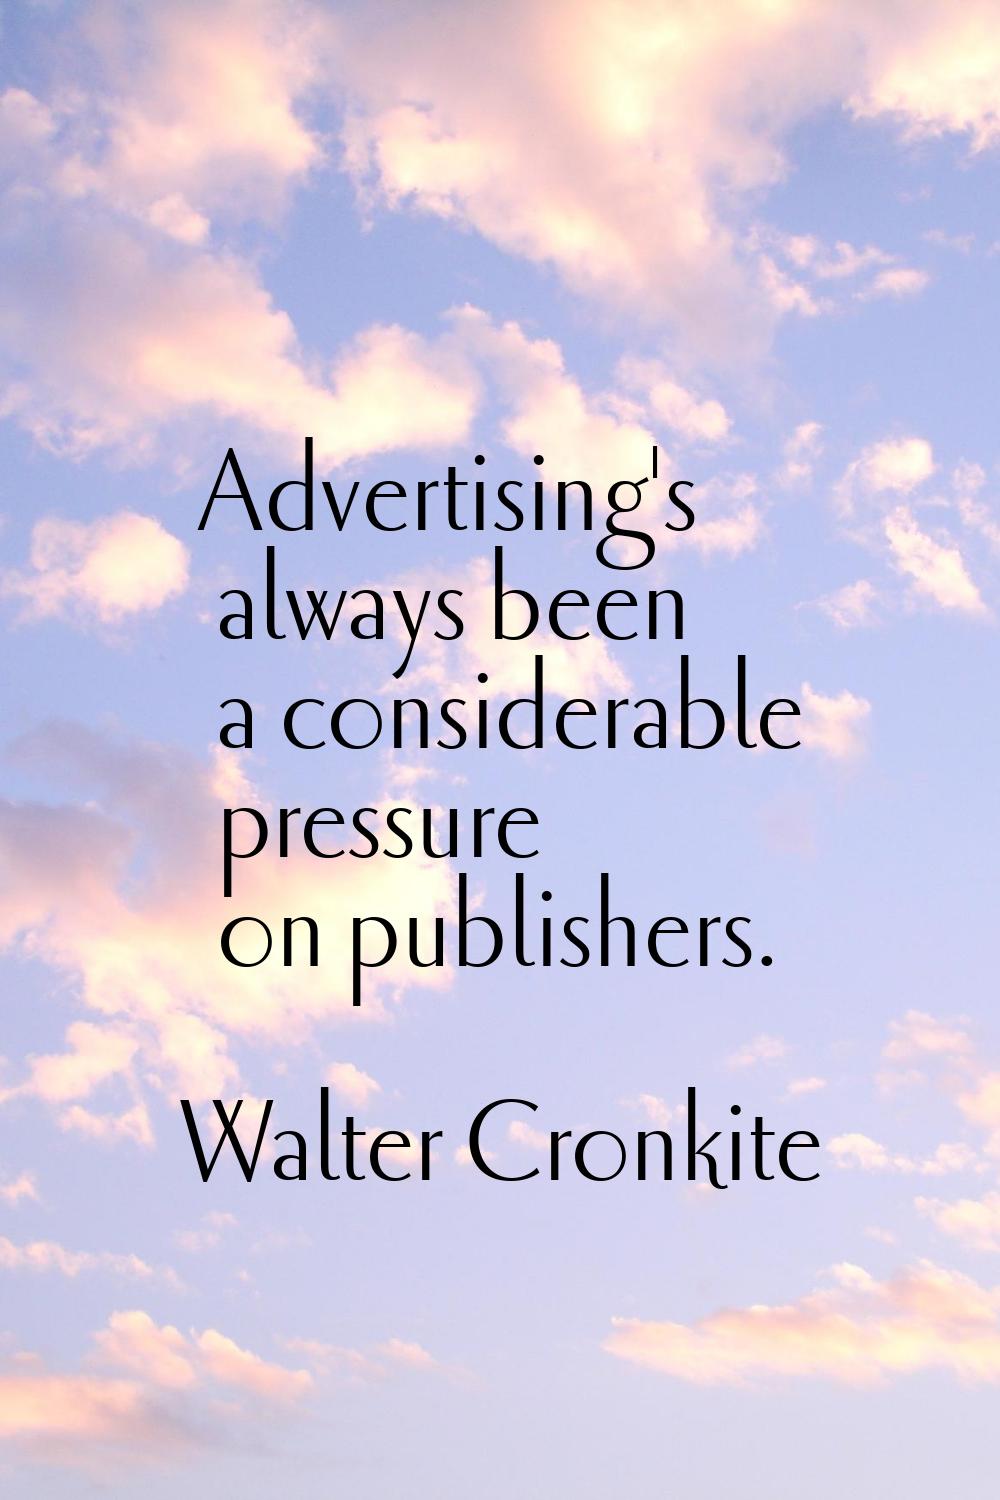 Advertising's always been a considerable pressure on publishers.